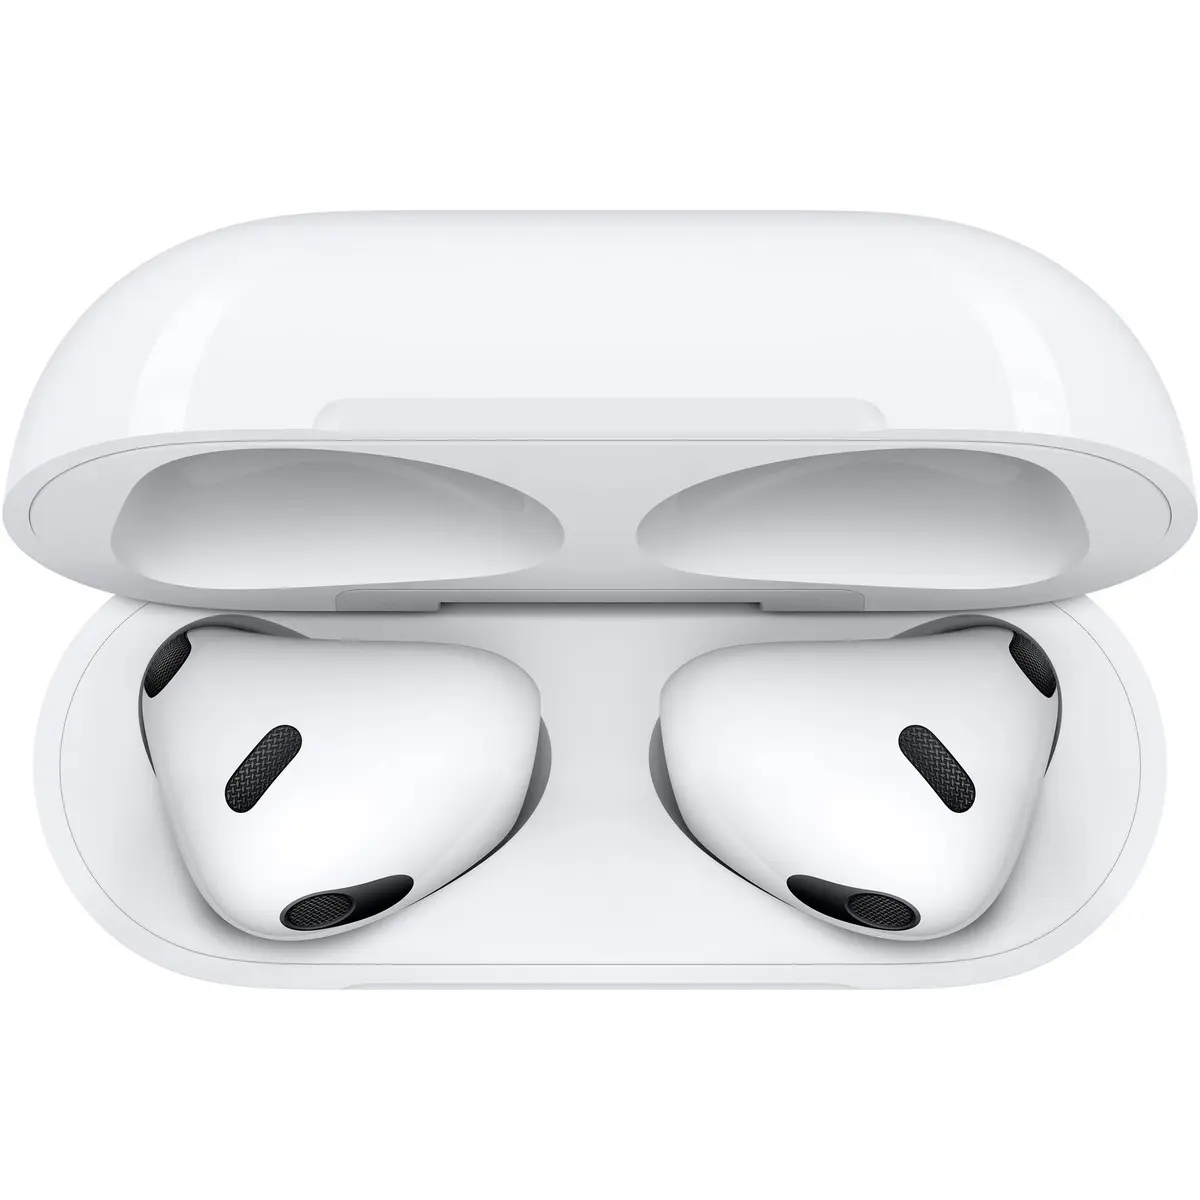 3. Apple AirPods 3 White